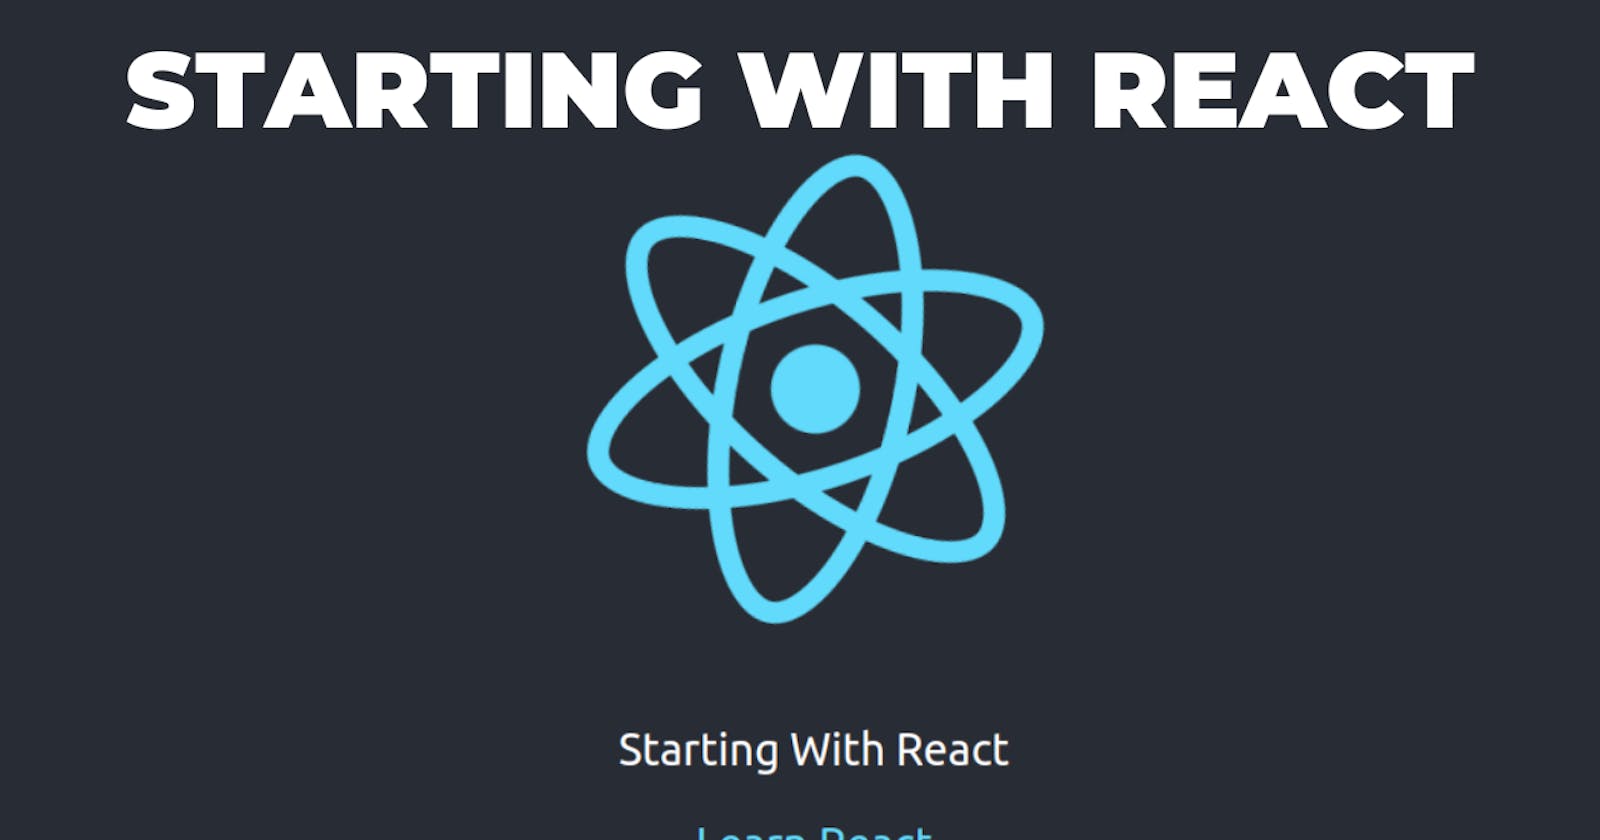 Starting With React
- create react app